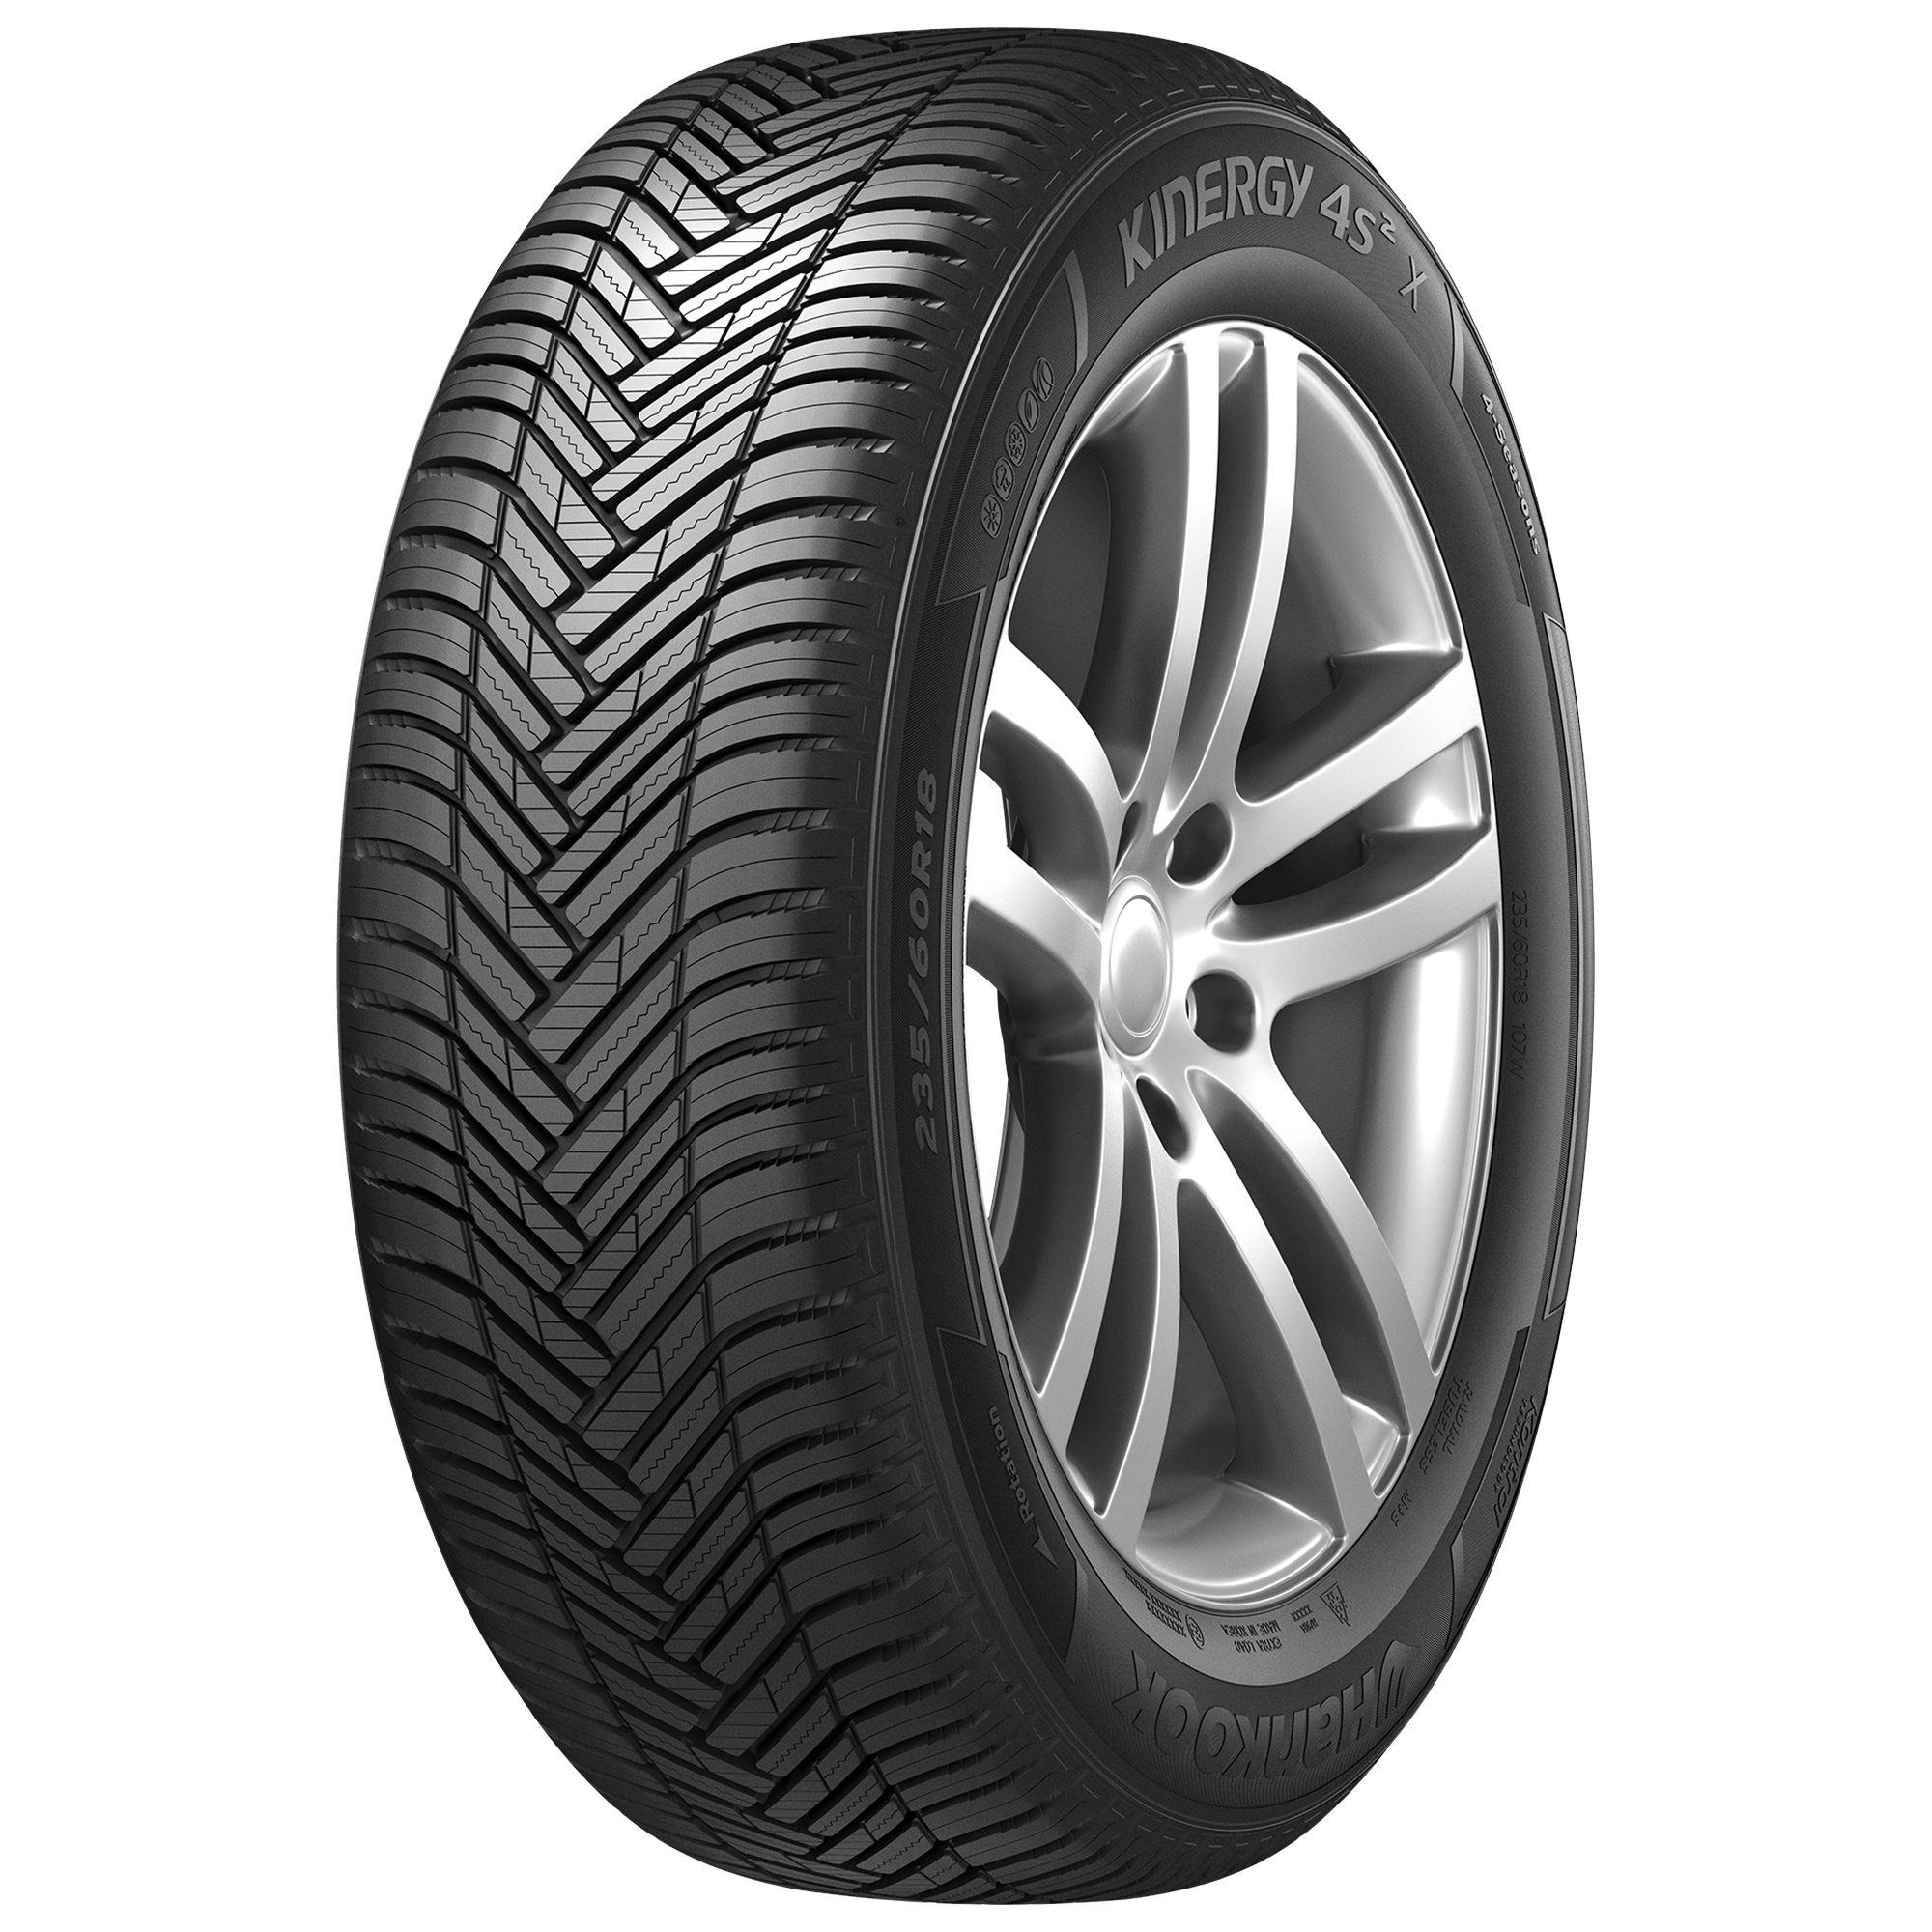 HANKOOK KINERGY 4S 2 X (H750A) 235/60R17 106H BSW